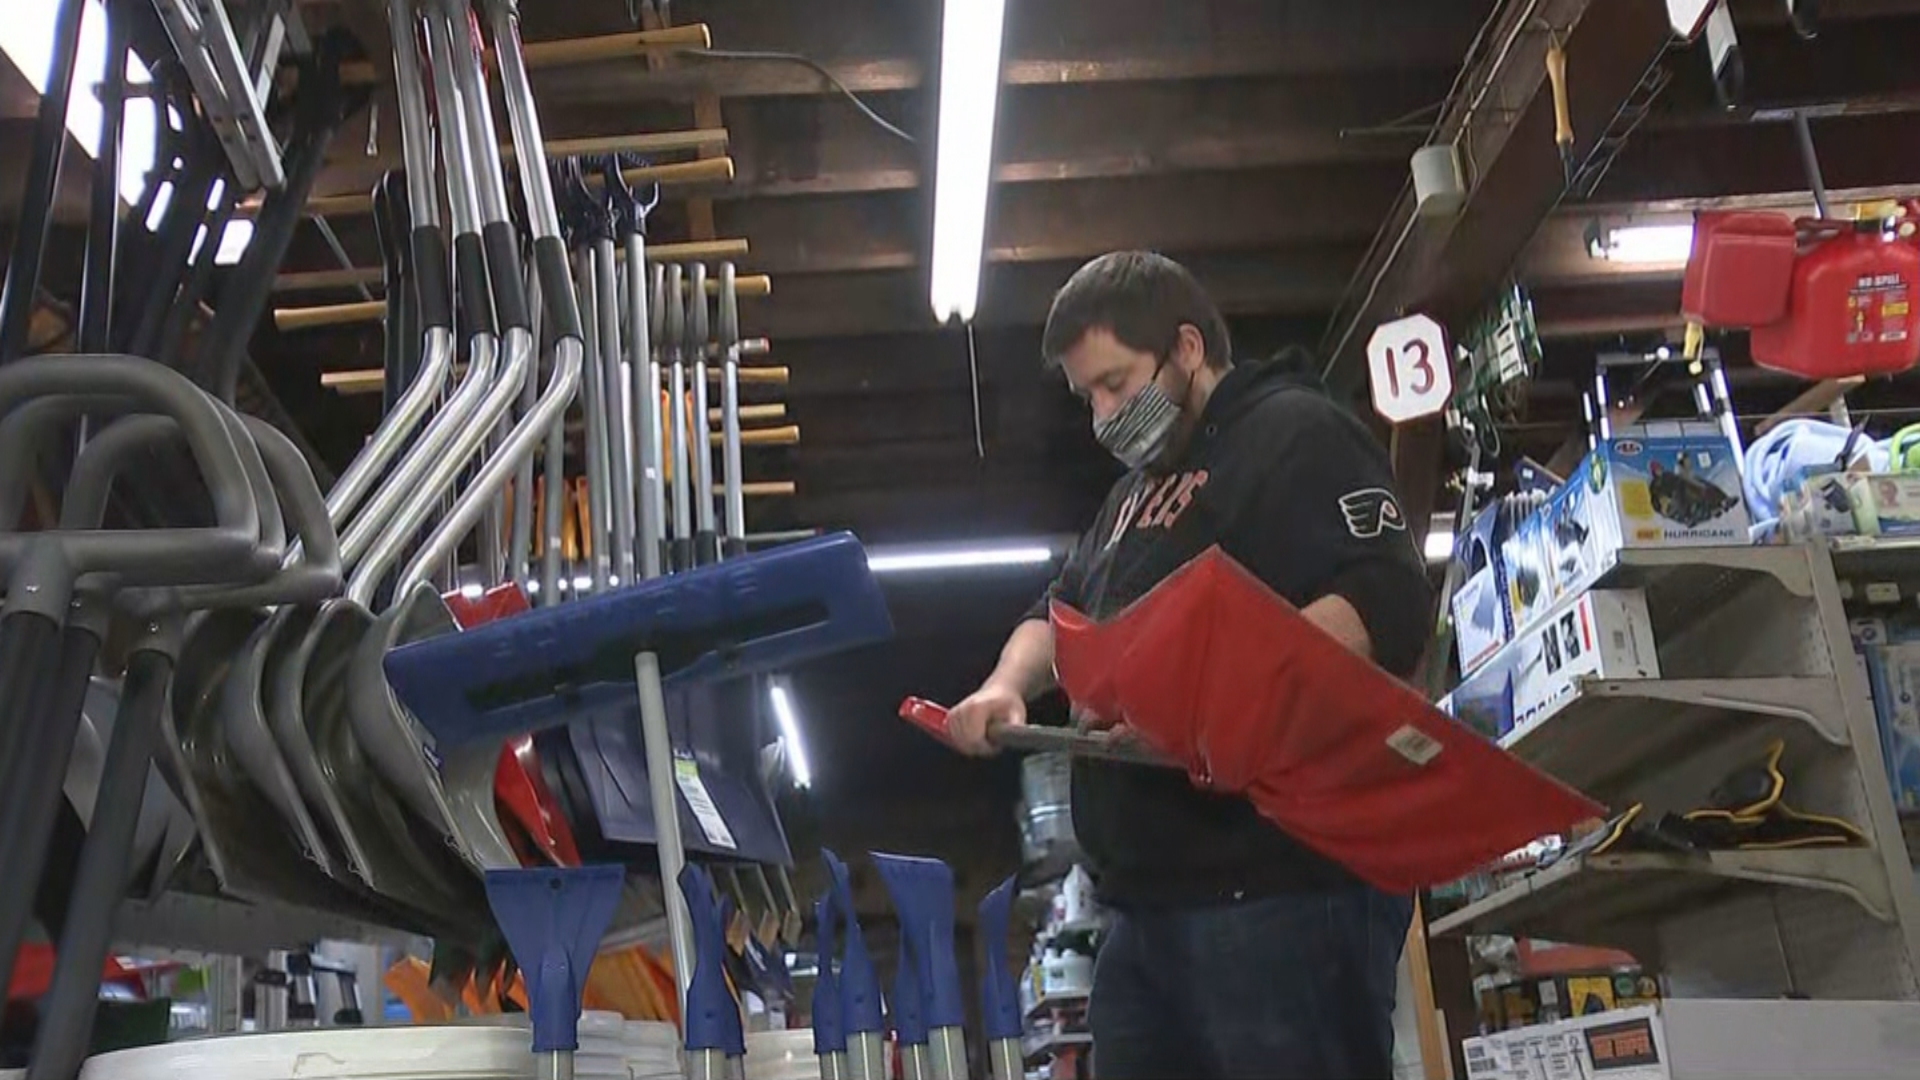 Some Philadelphia Area Hardware Stores Overstocked With Winter Storm Products Due To Supply Chain Shortage: 'It'd Be Nice To Move Some Of This Inventory Out'